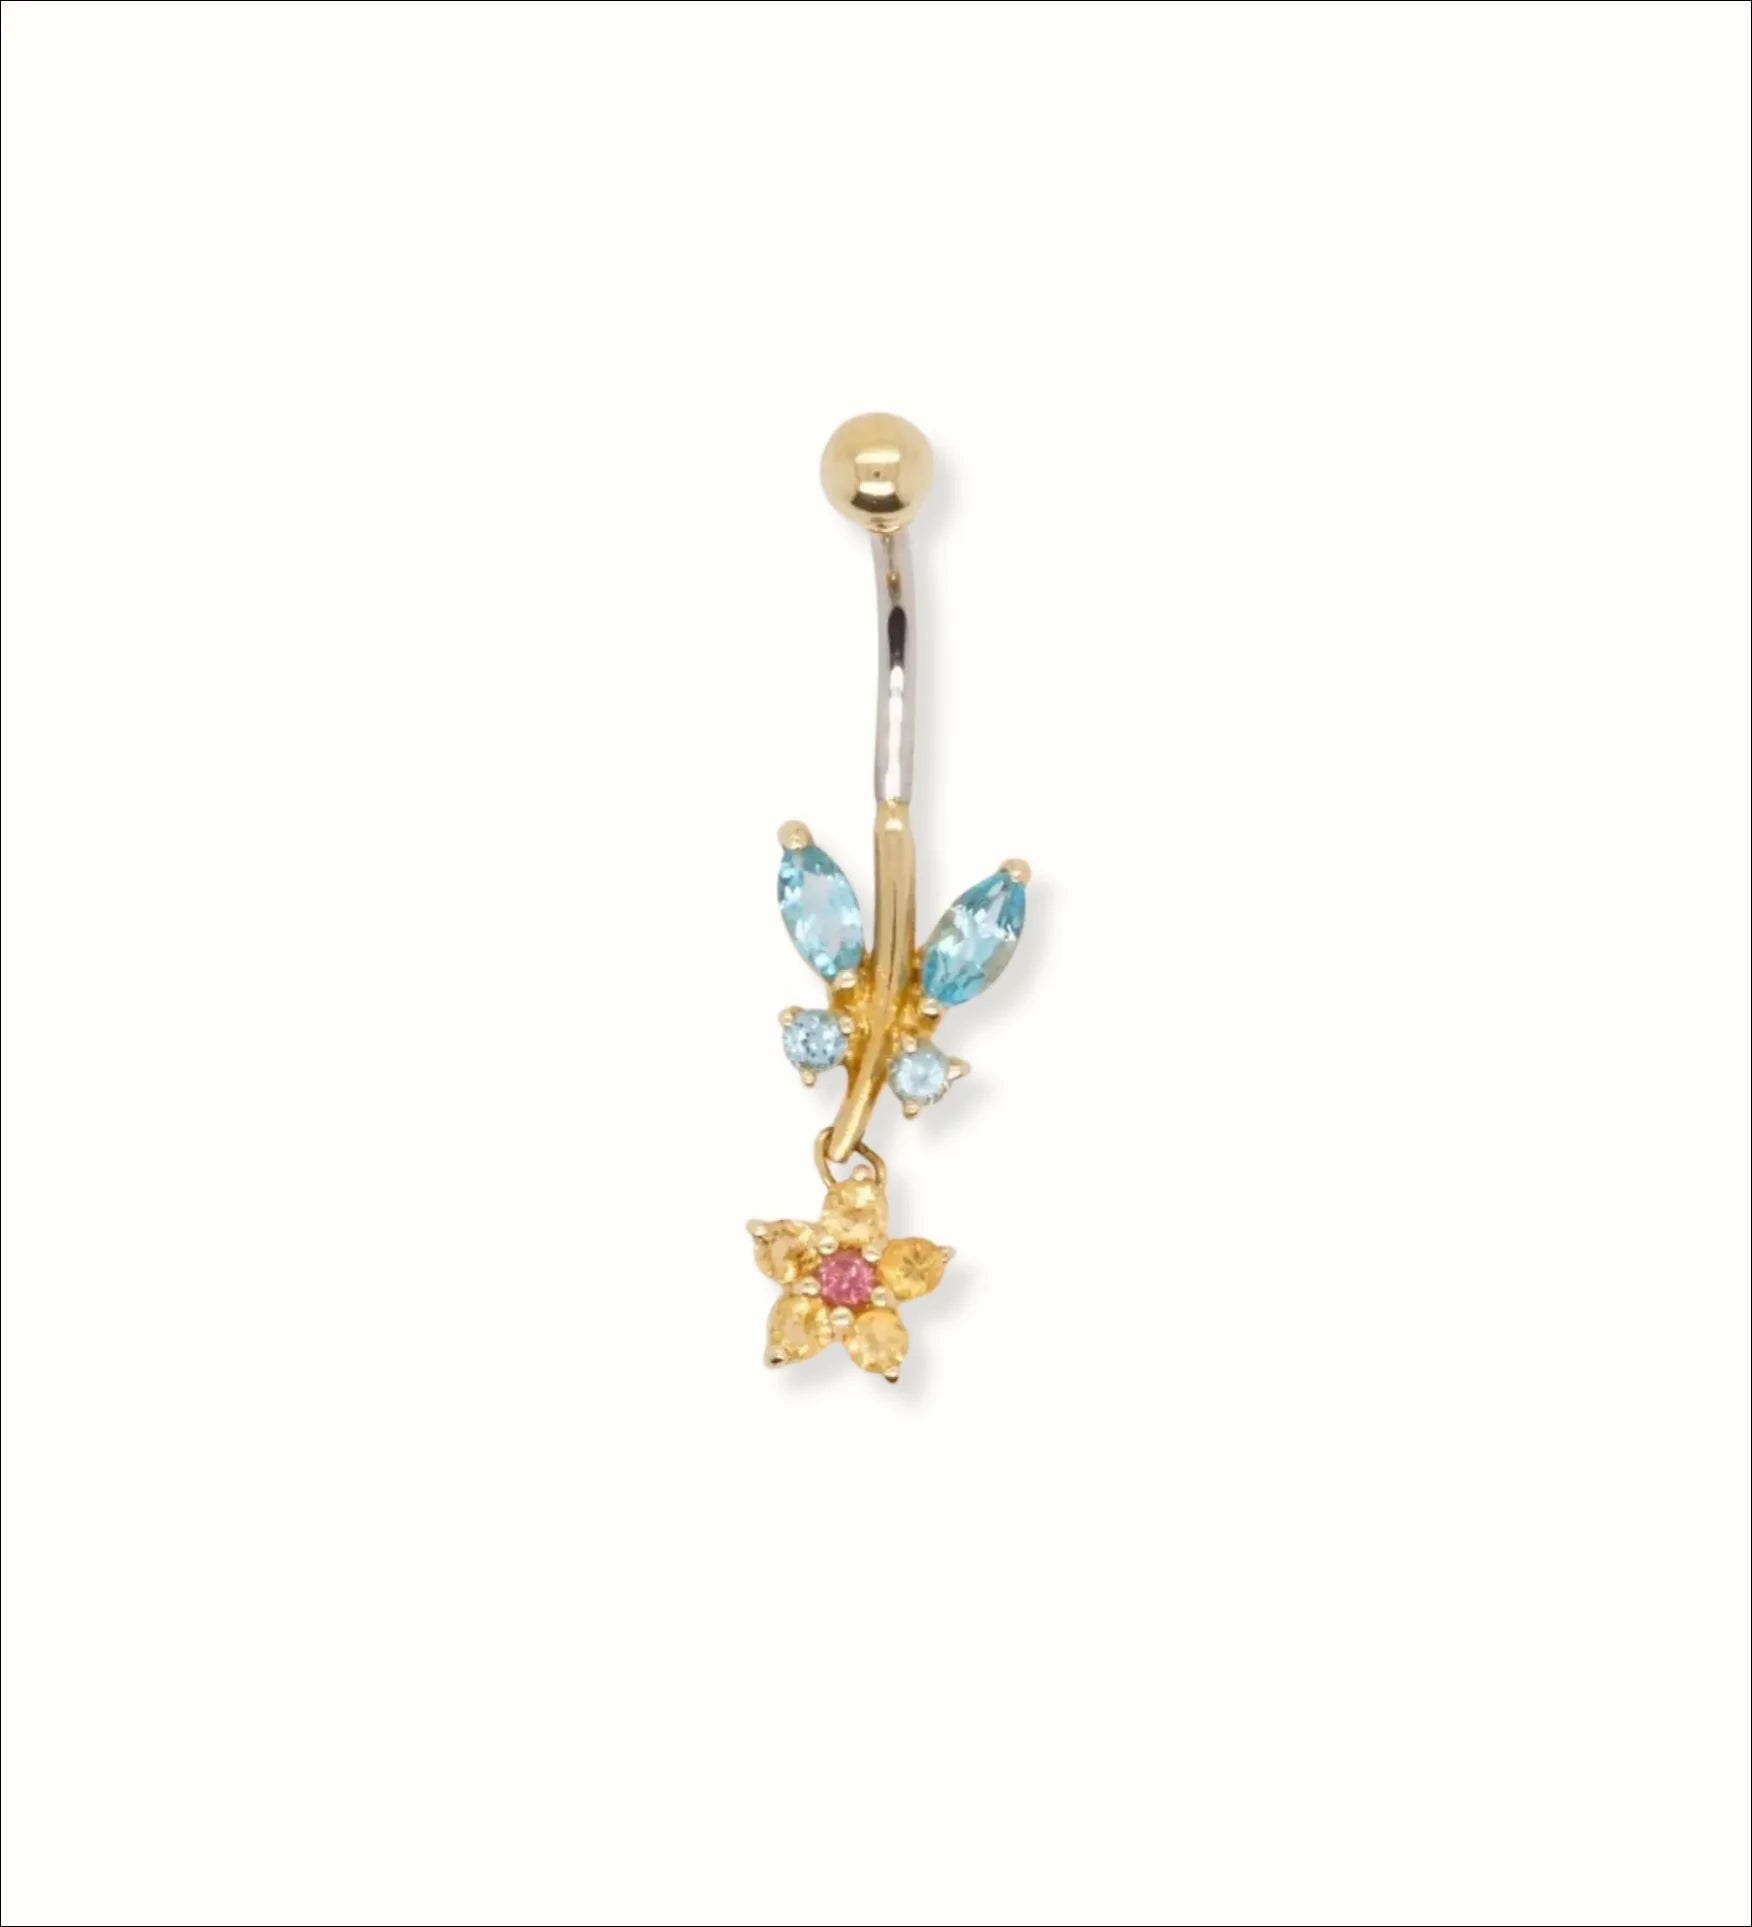 Luxury Topaz Bellybutton Piercing | Home page